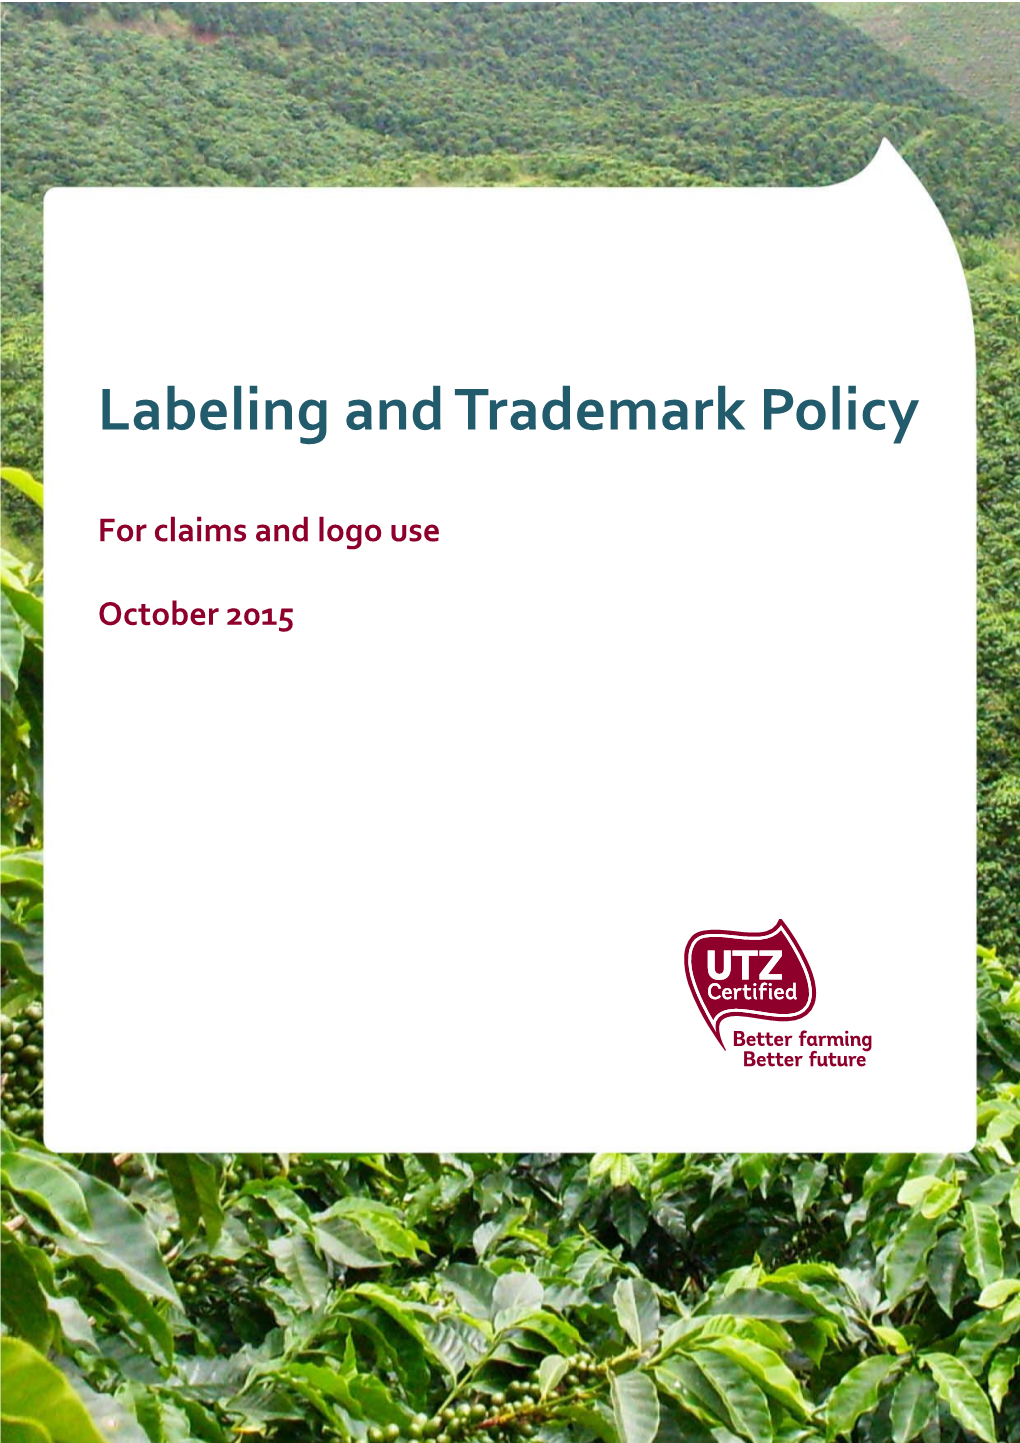 Labeling and Trademark Policy